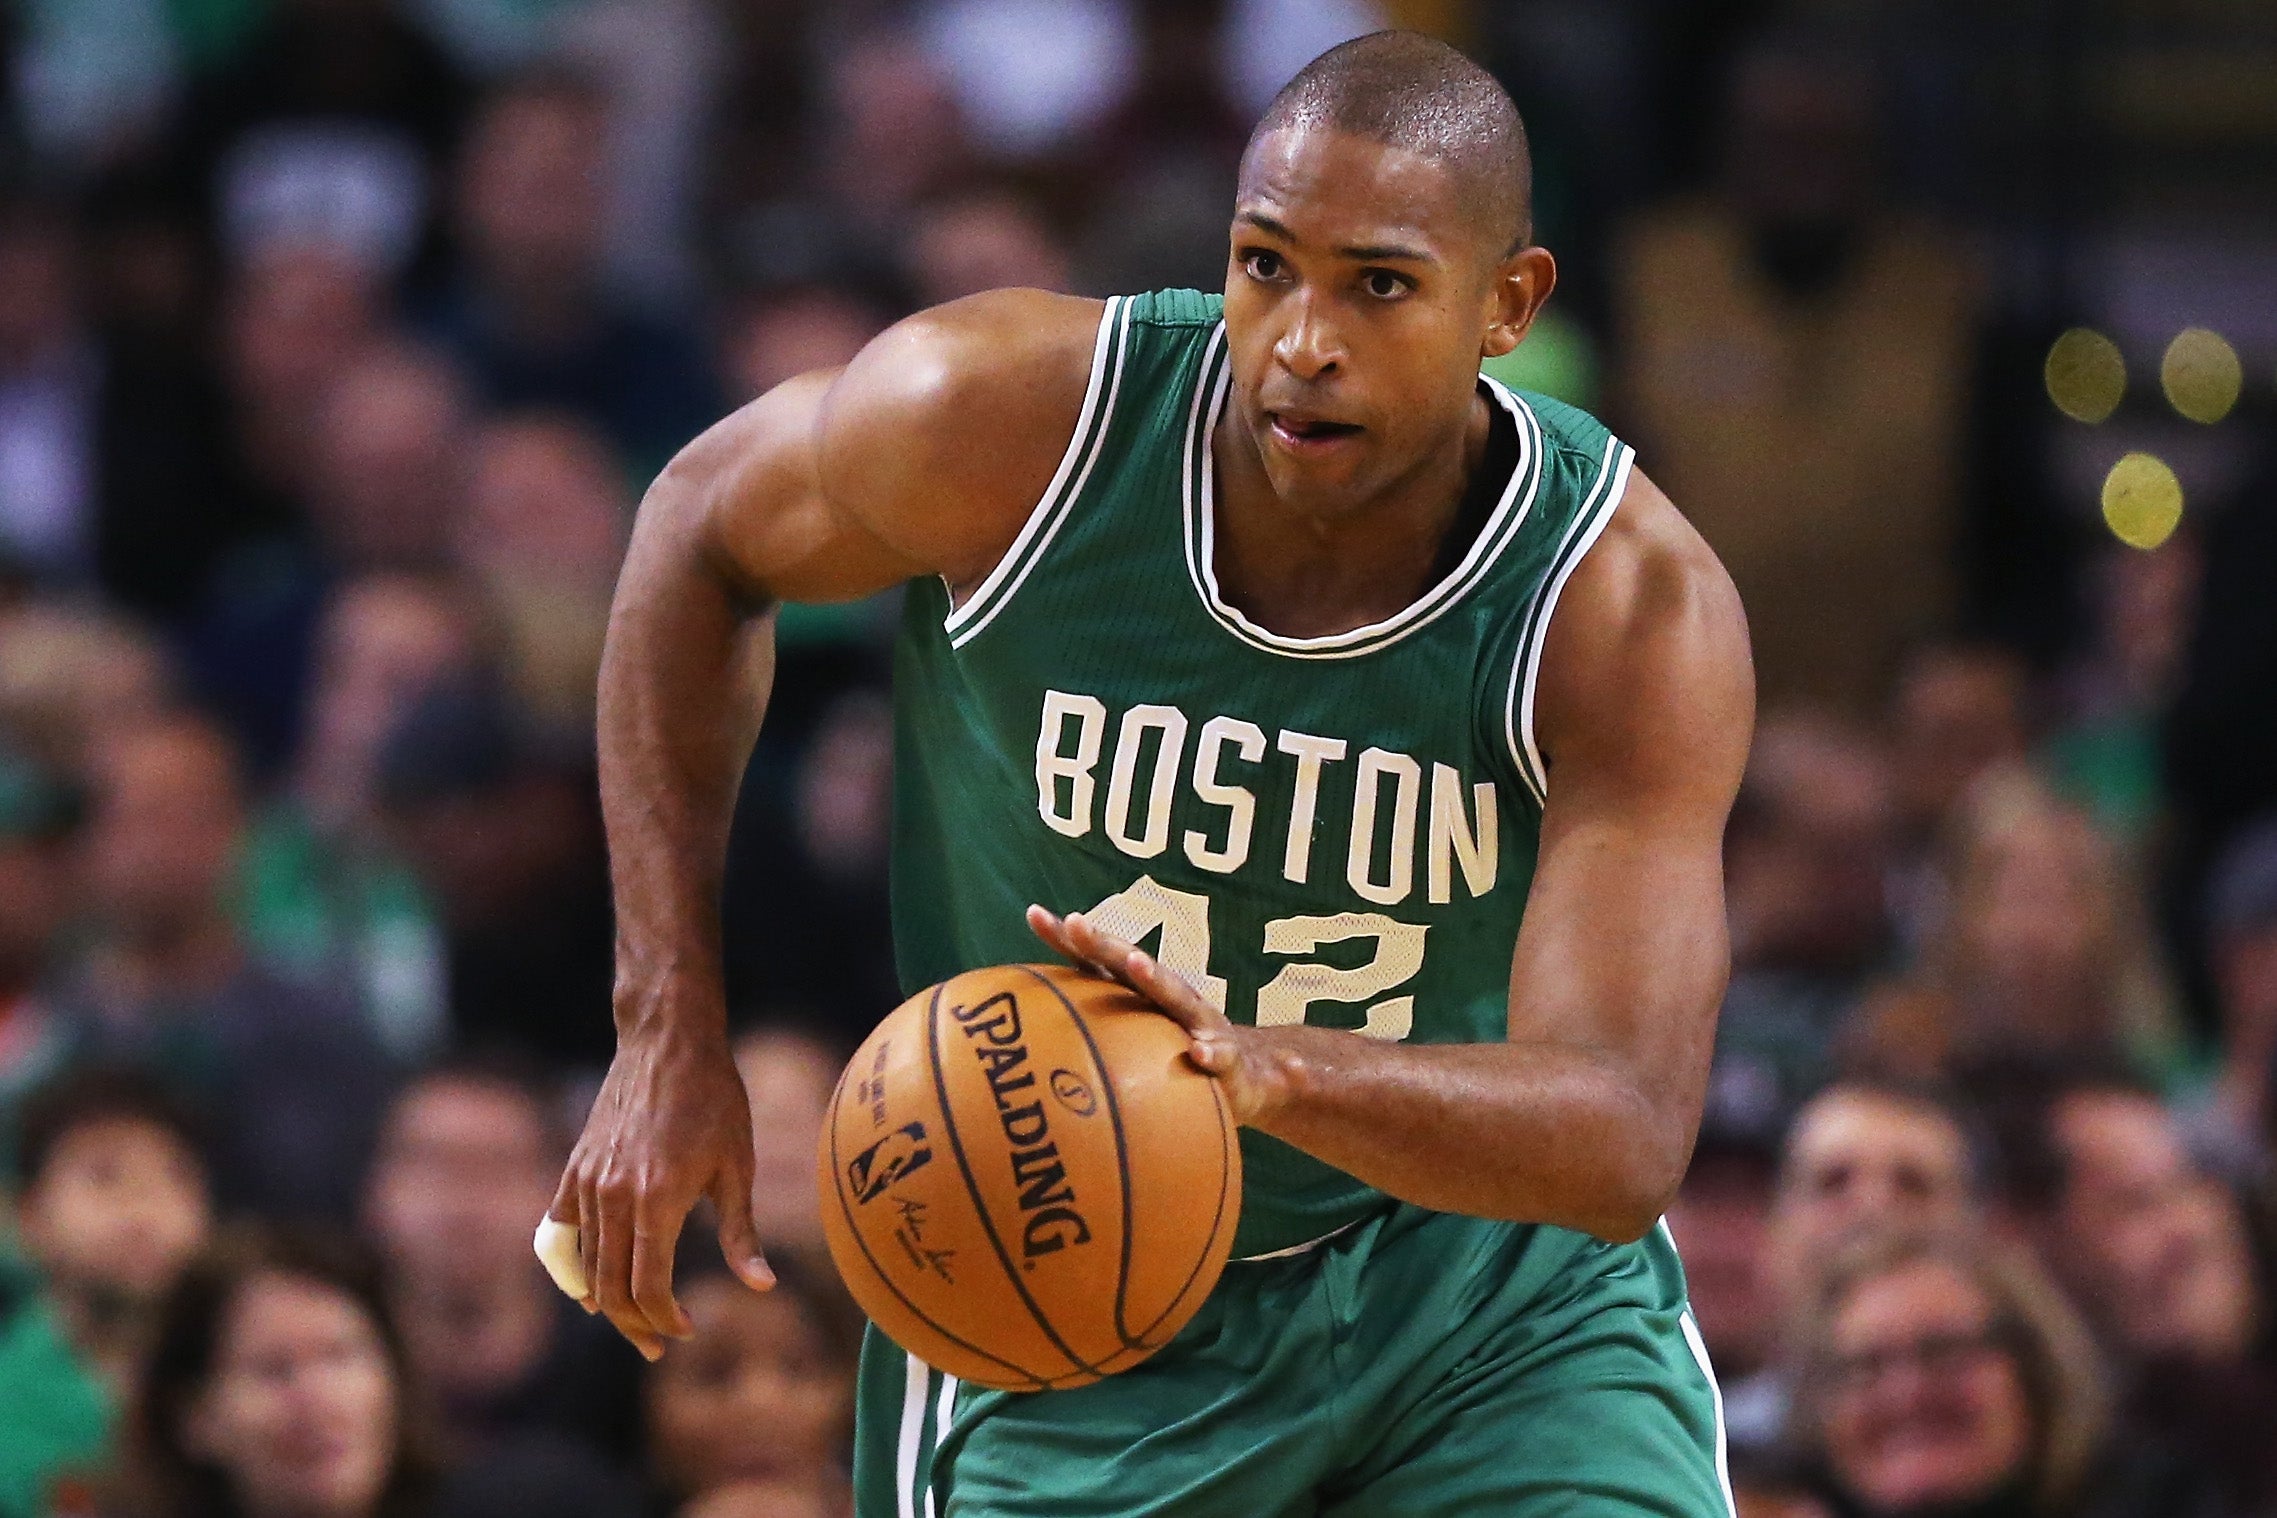 Boston's Al Horford on his recent success shooting the 3 from the corners